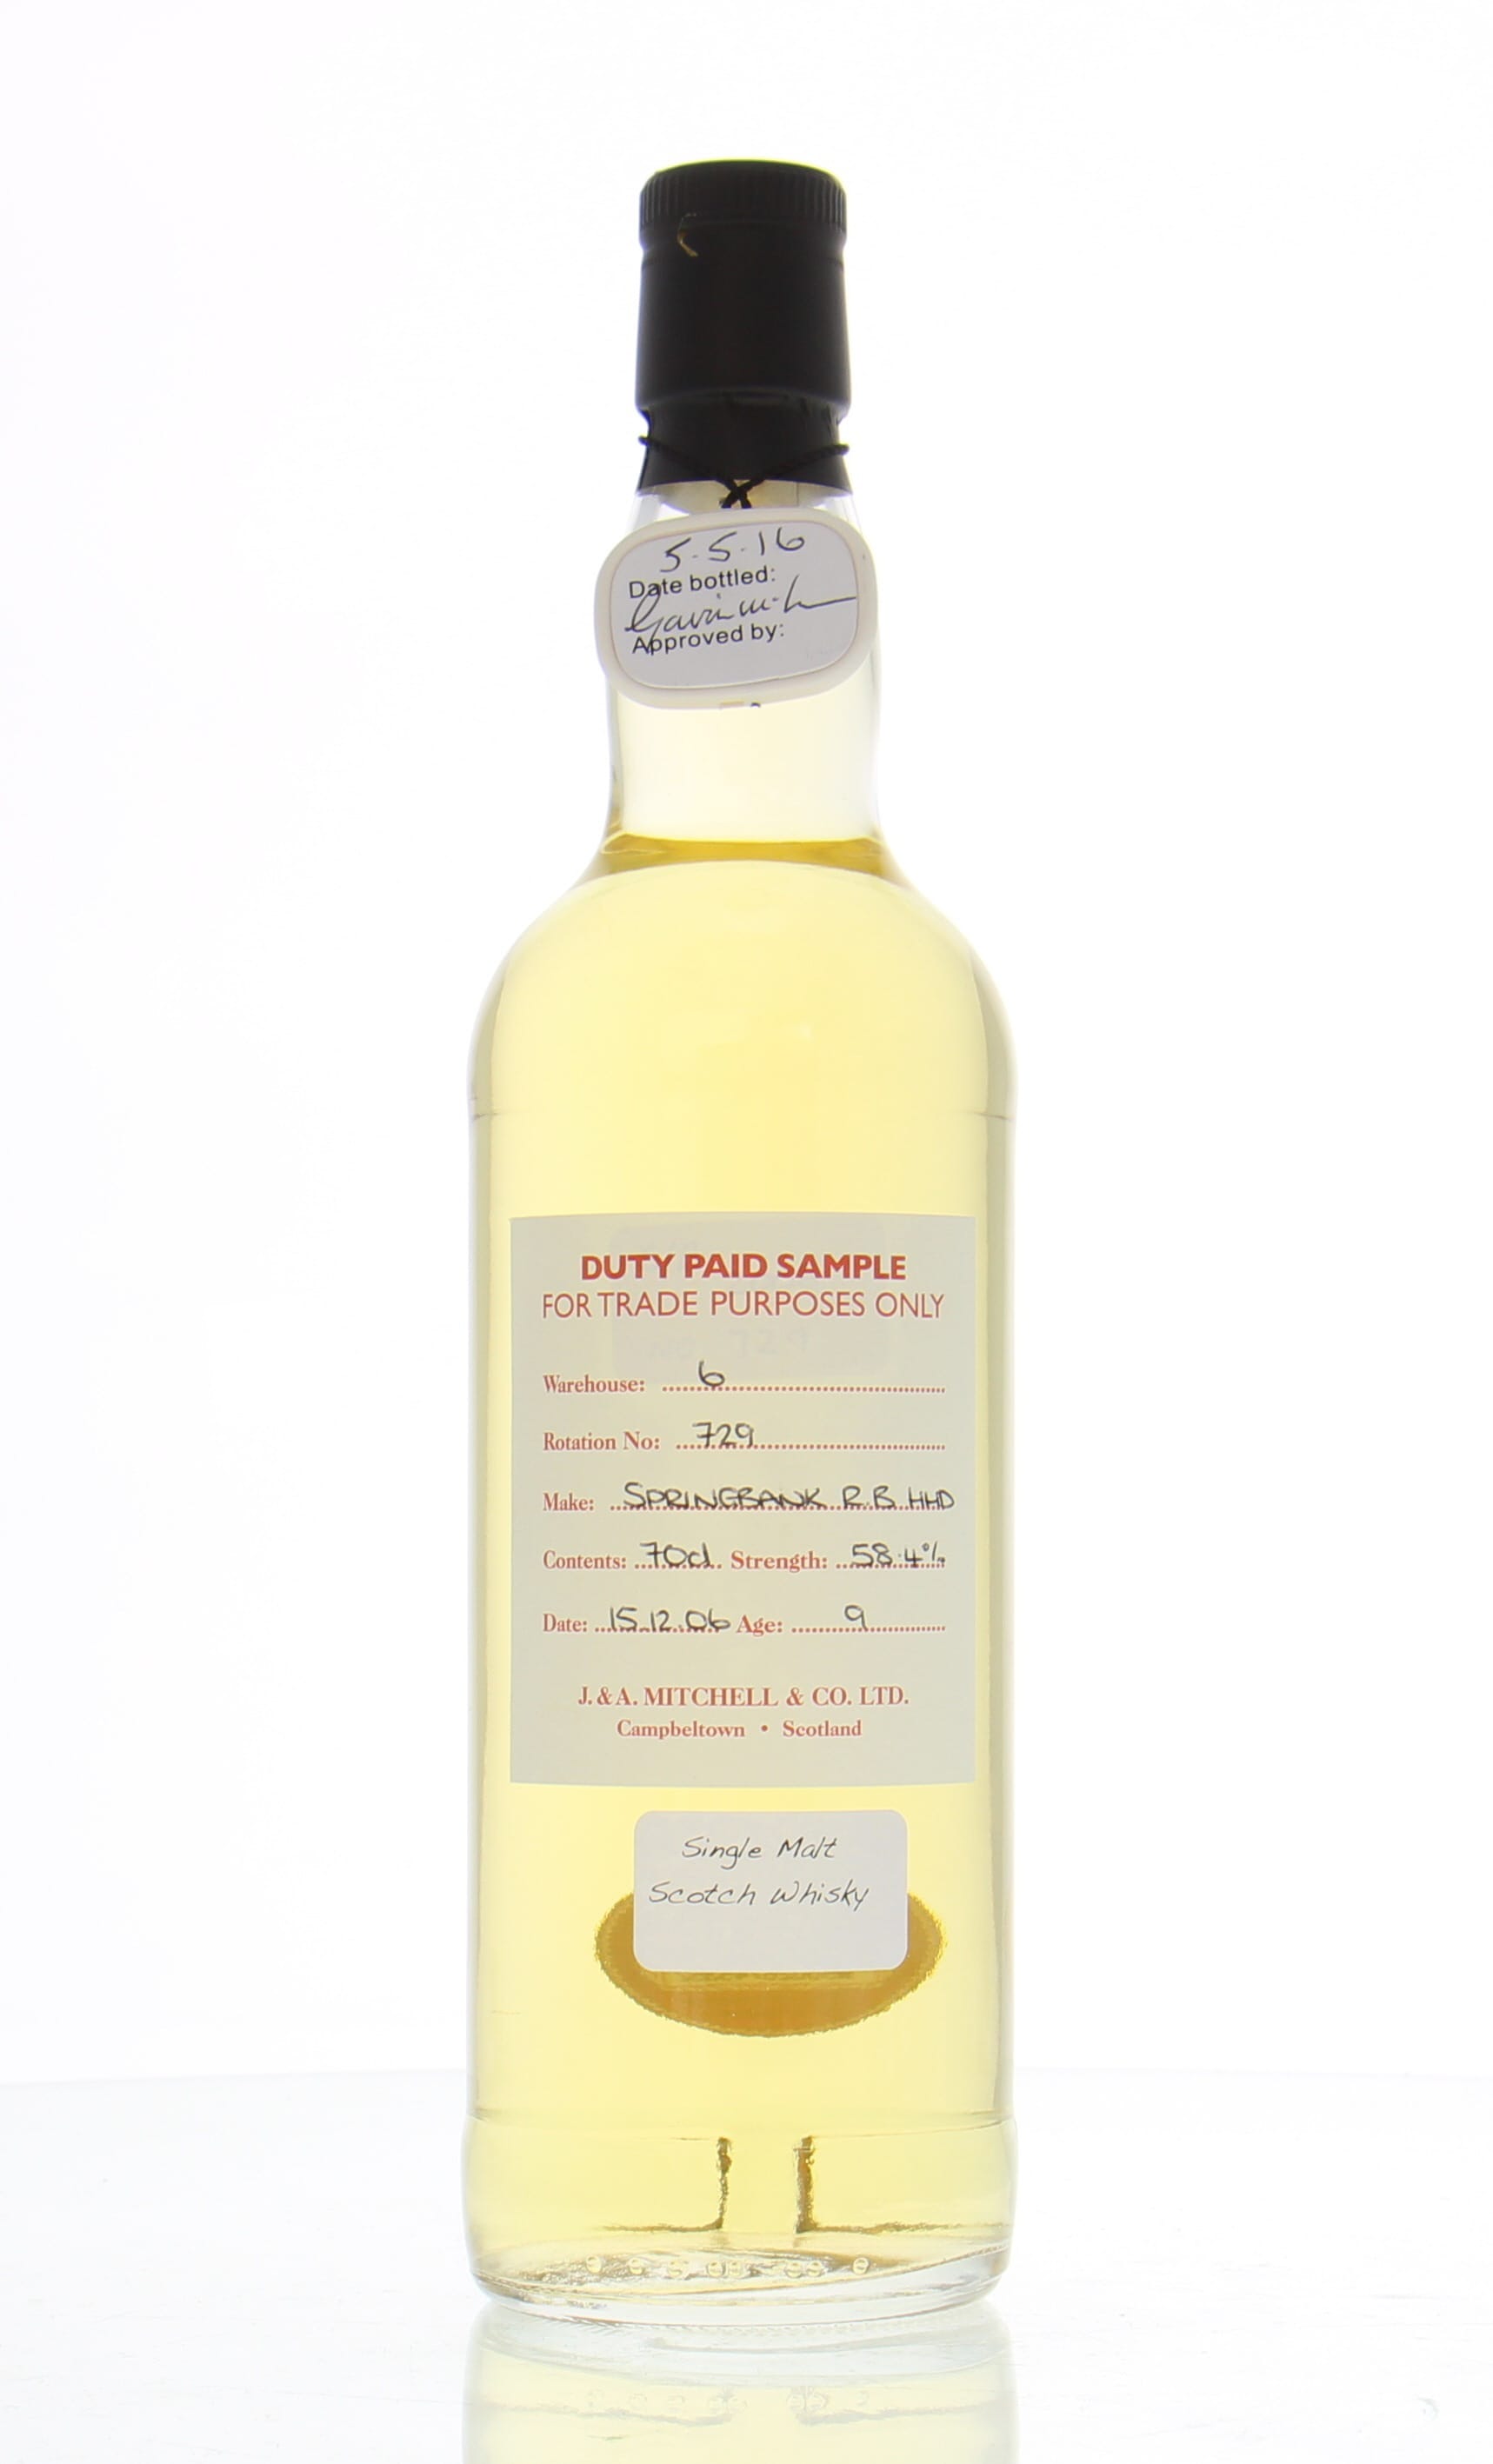 Springbank - 9 Years Old Duty Paid Sample Warehouse 6 Rotation 729 58.4% 2006 Perfect